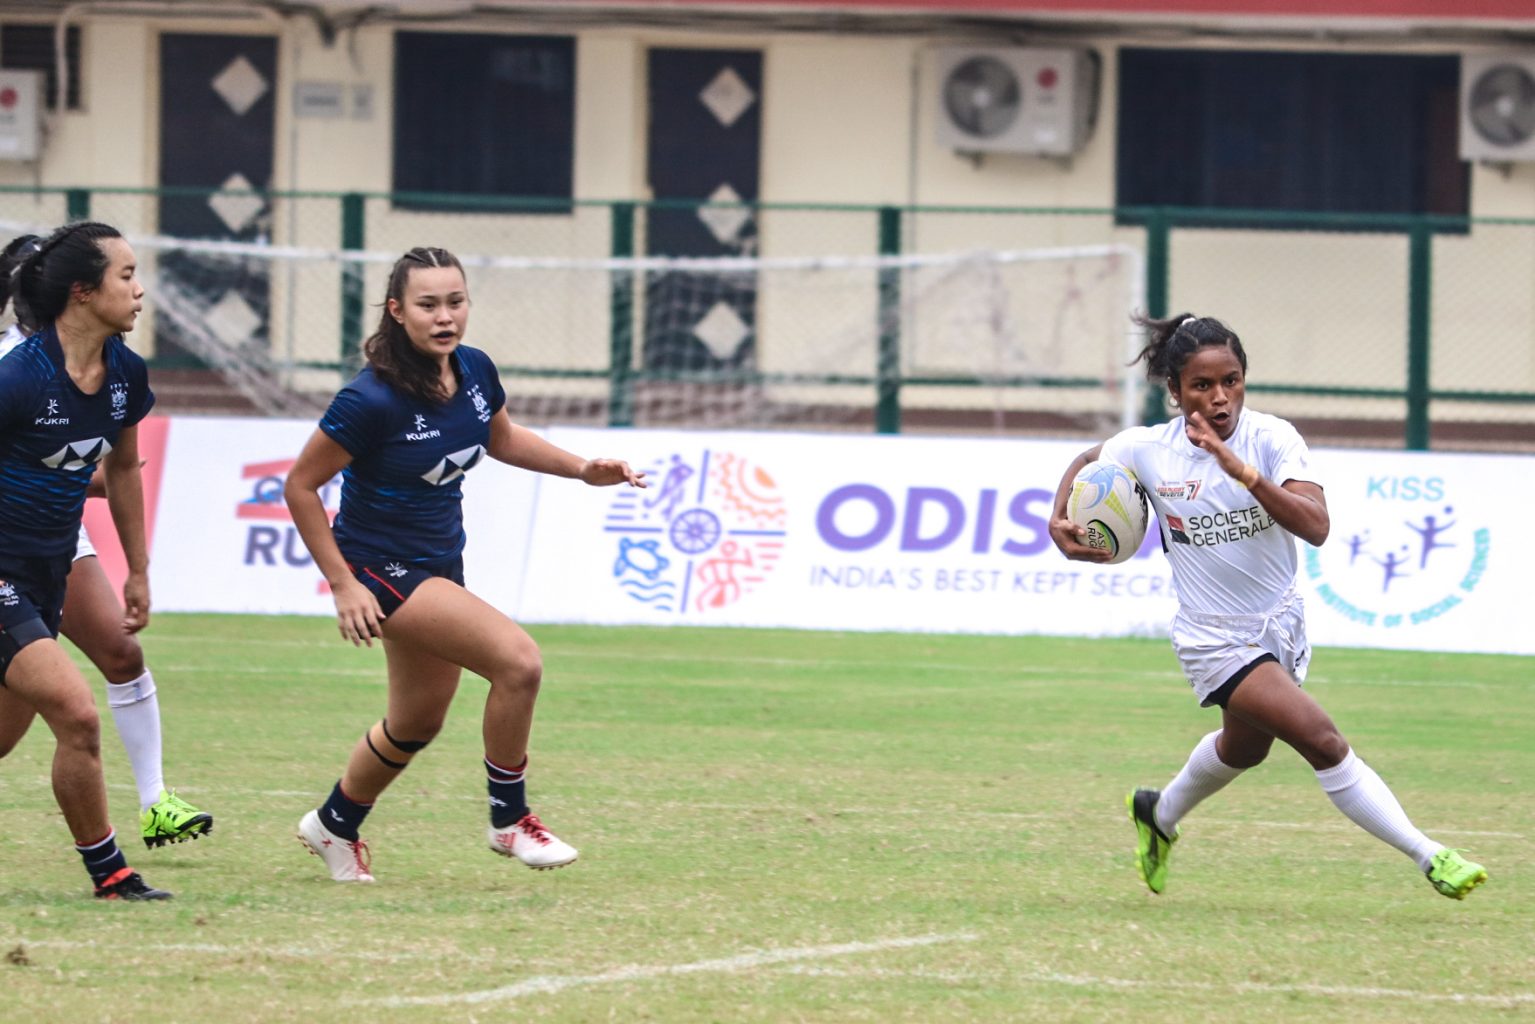 Sweety Kumari was just named 2019's International Young Player of the Year by women's rugby magazine- (Source: Rugby India)